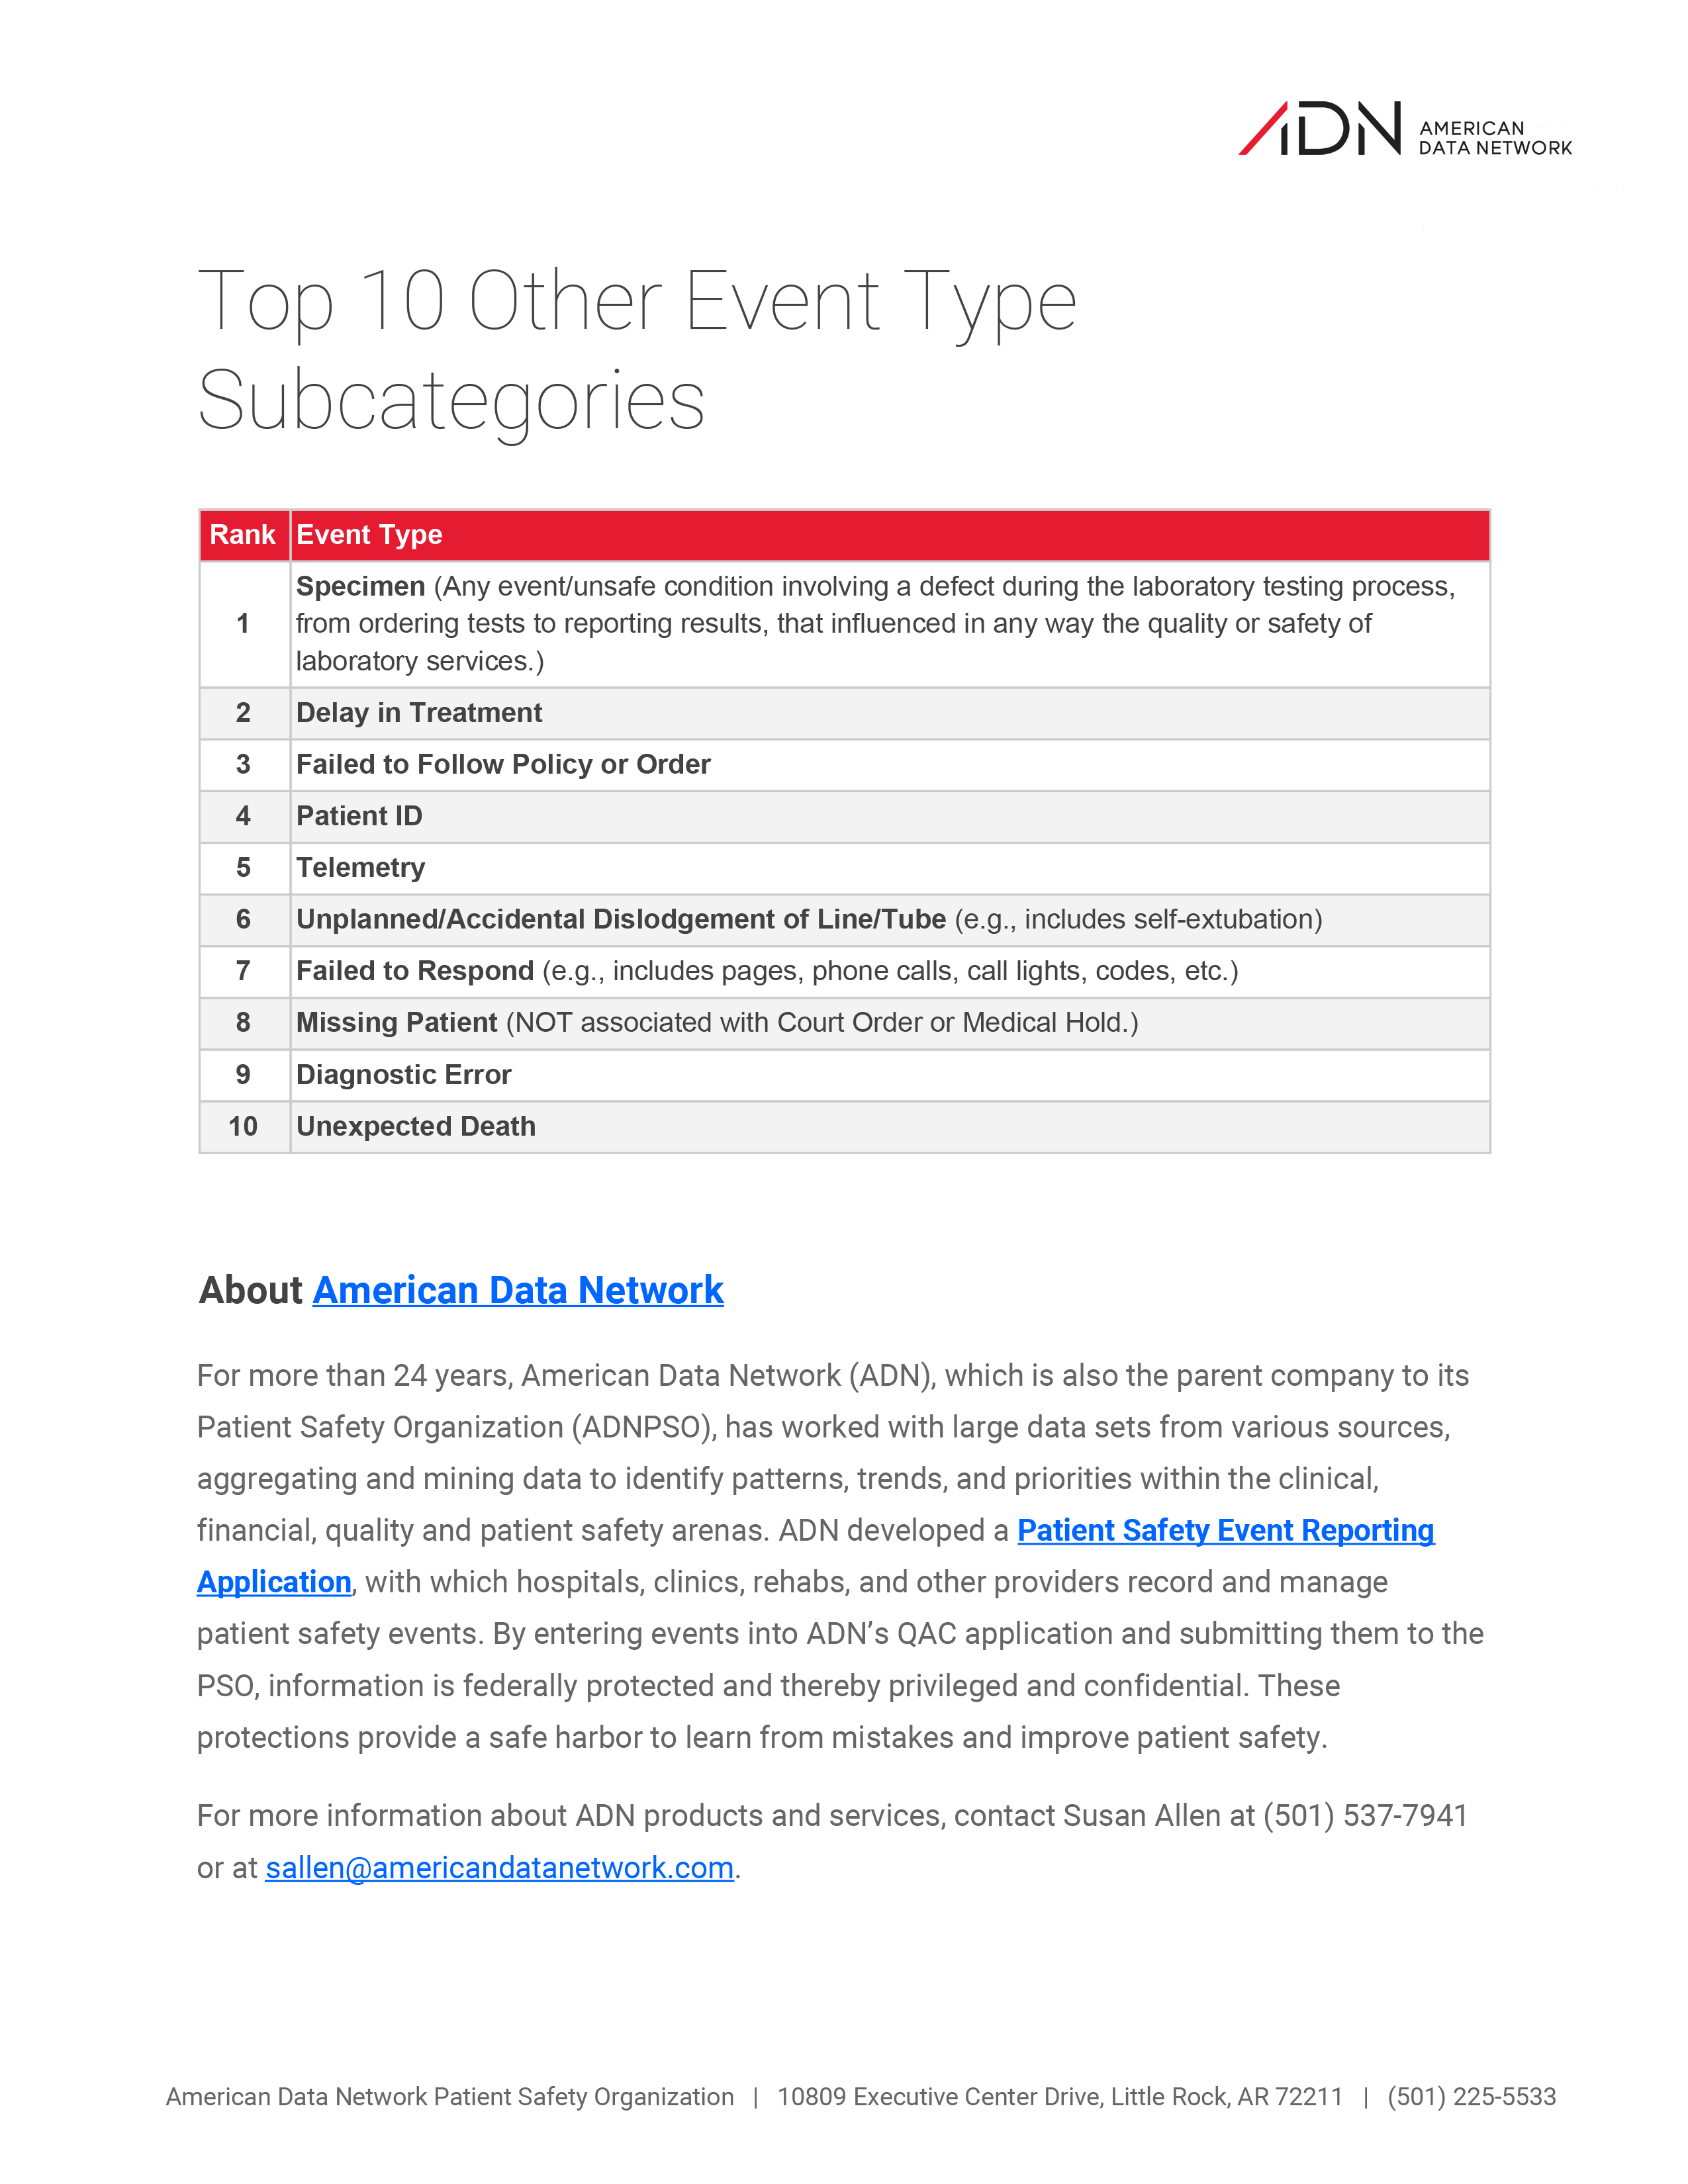 Top-10-Other-Event-Subcategories